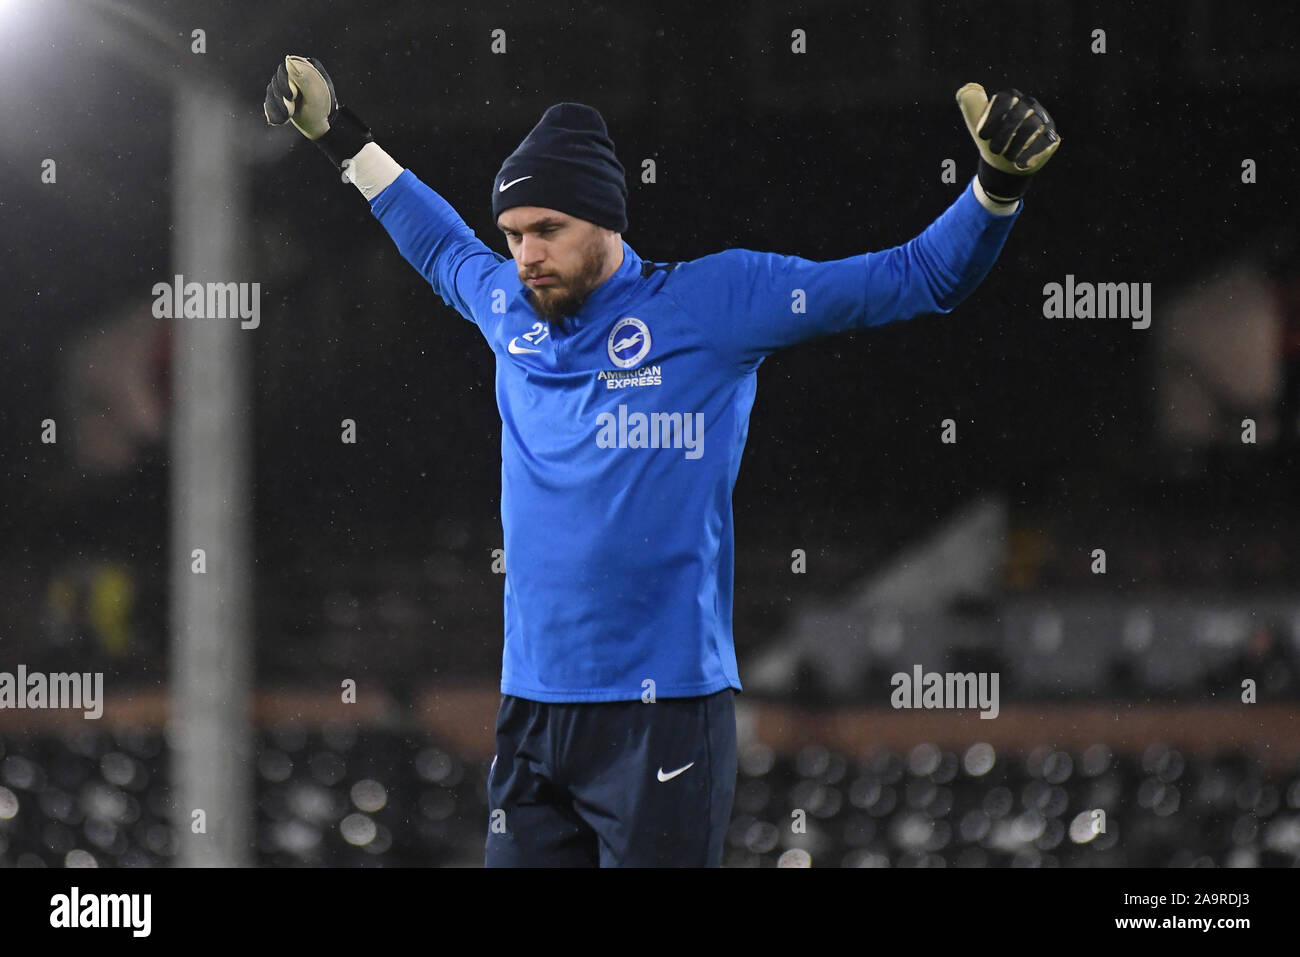 LONDON, ENGLAND - JANUARY 29, 2019: David Button of Brighton pictured prior to the 2018/19 Premier League game between Fulham FC and Brighton and Hove Albion at Craven Cottage. Stock Photo